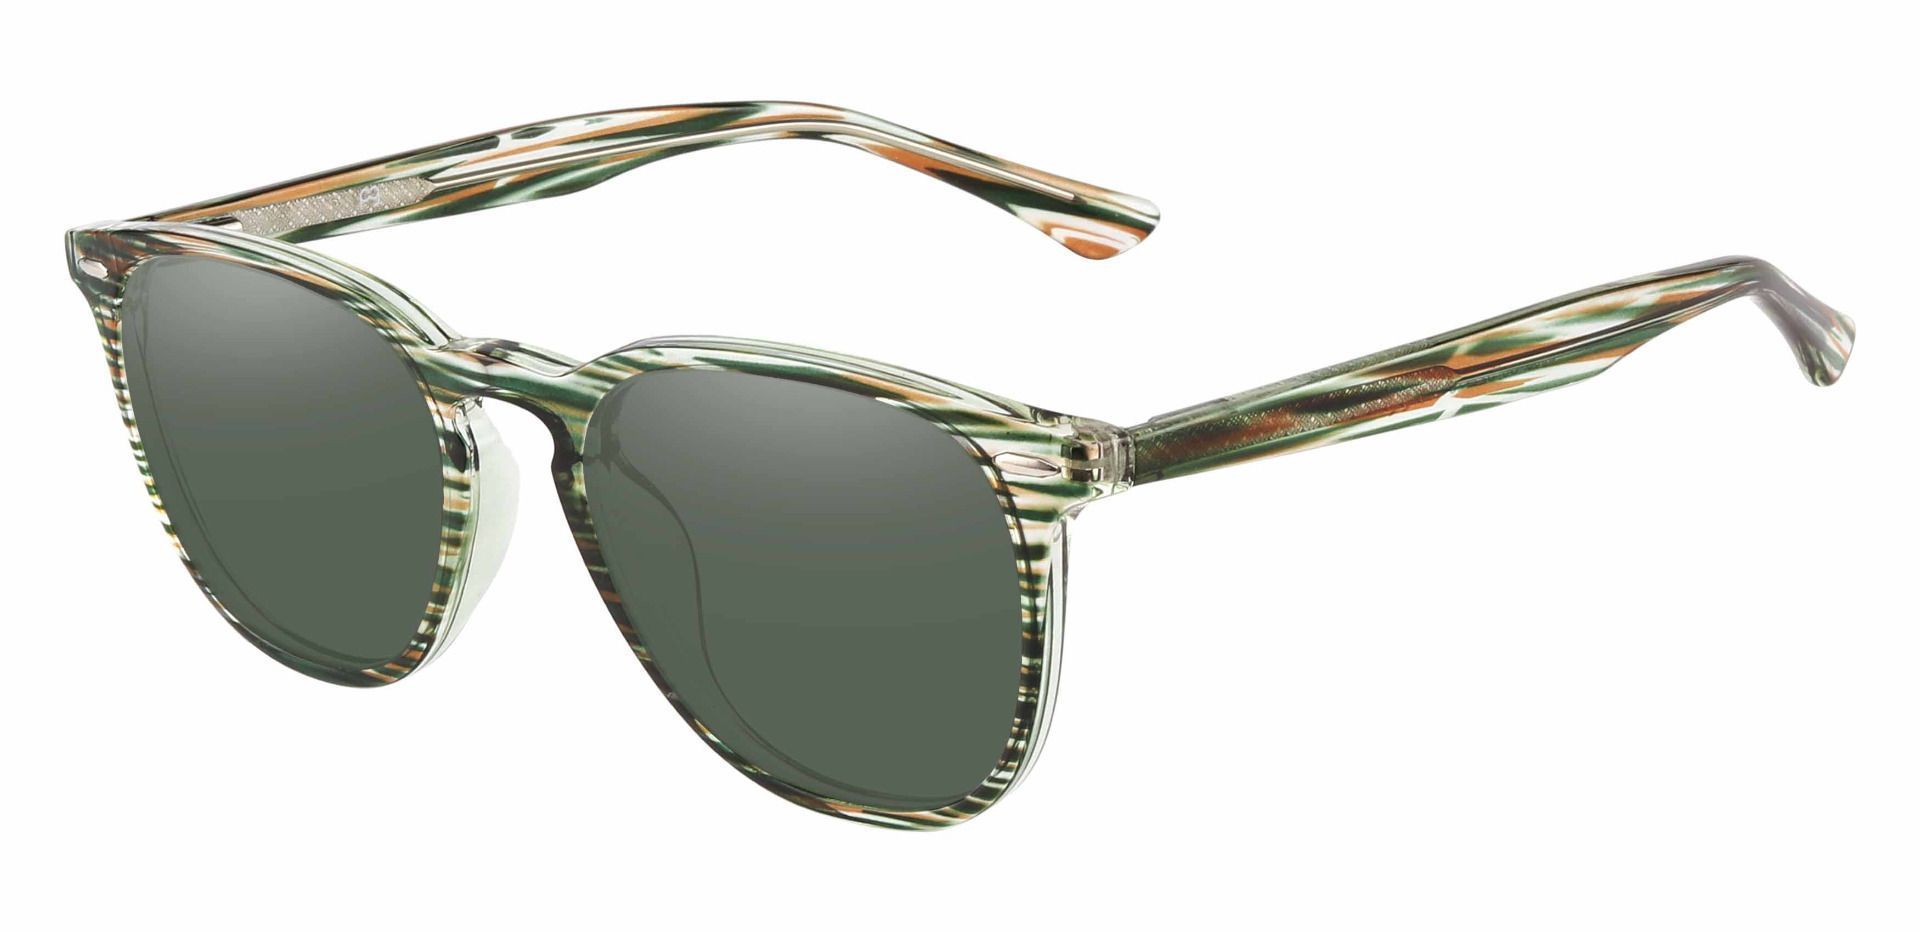 Sycamore Oval Non-Rx Sunglasses - Green Frame With Green Lenses